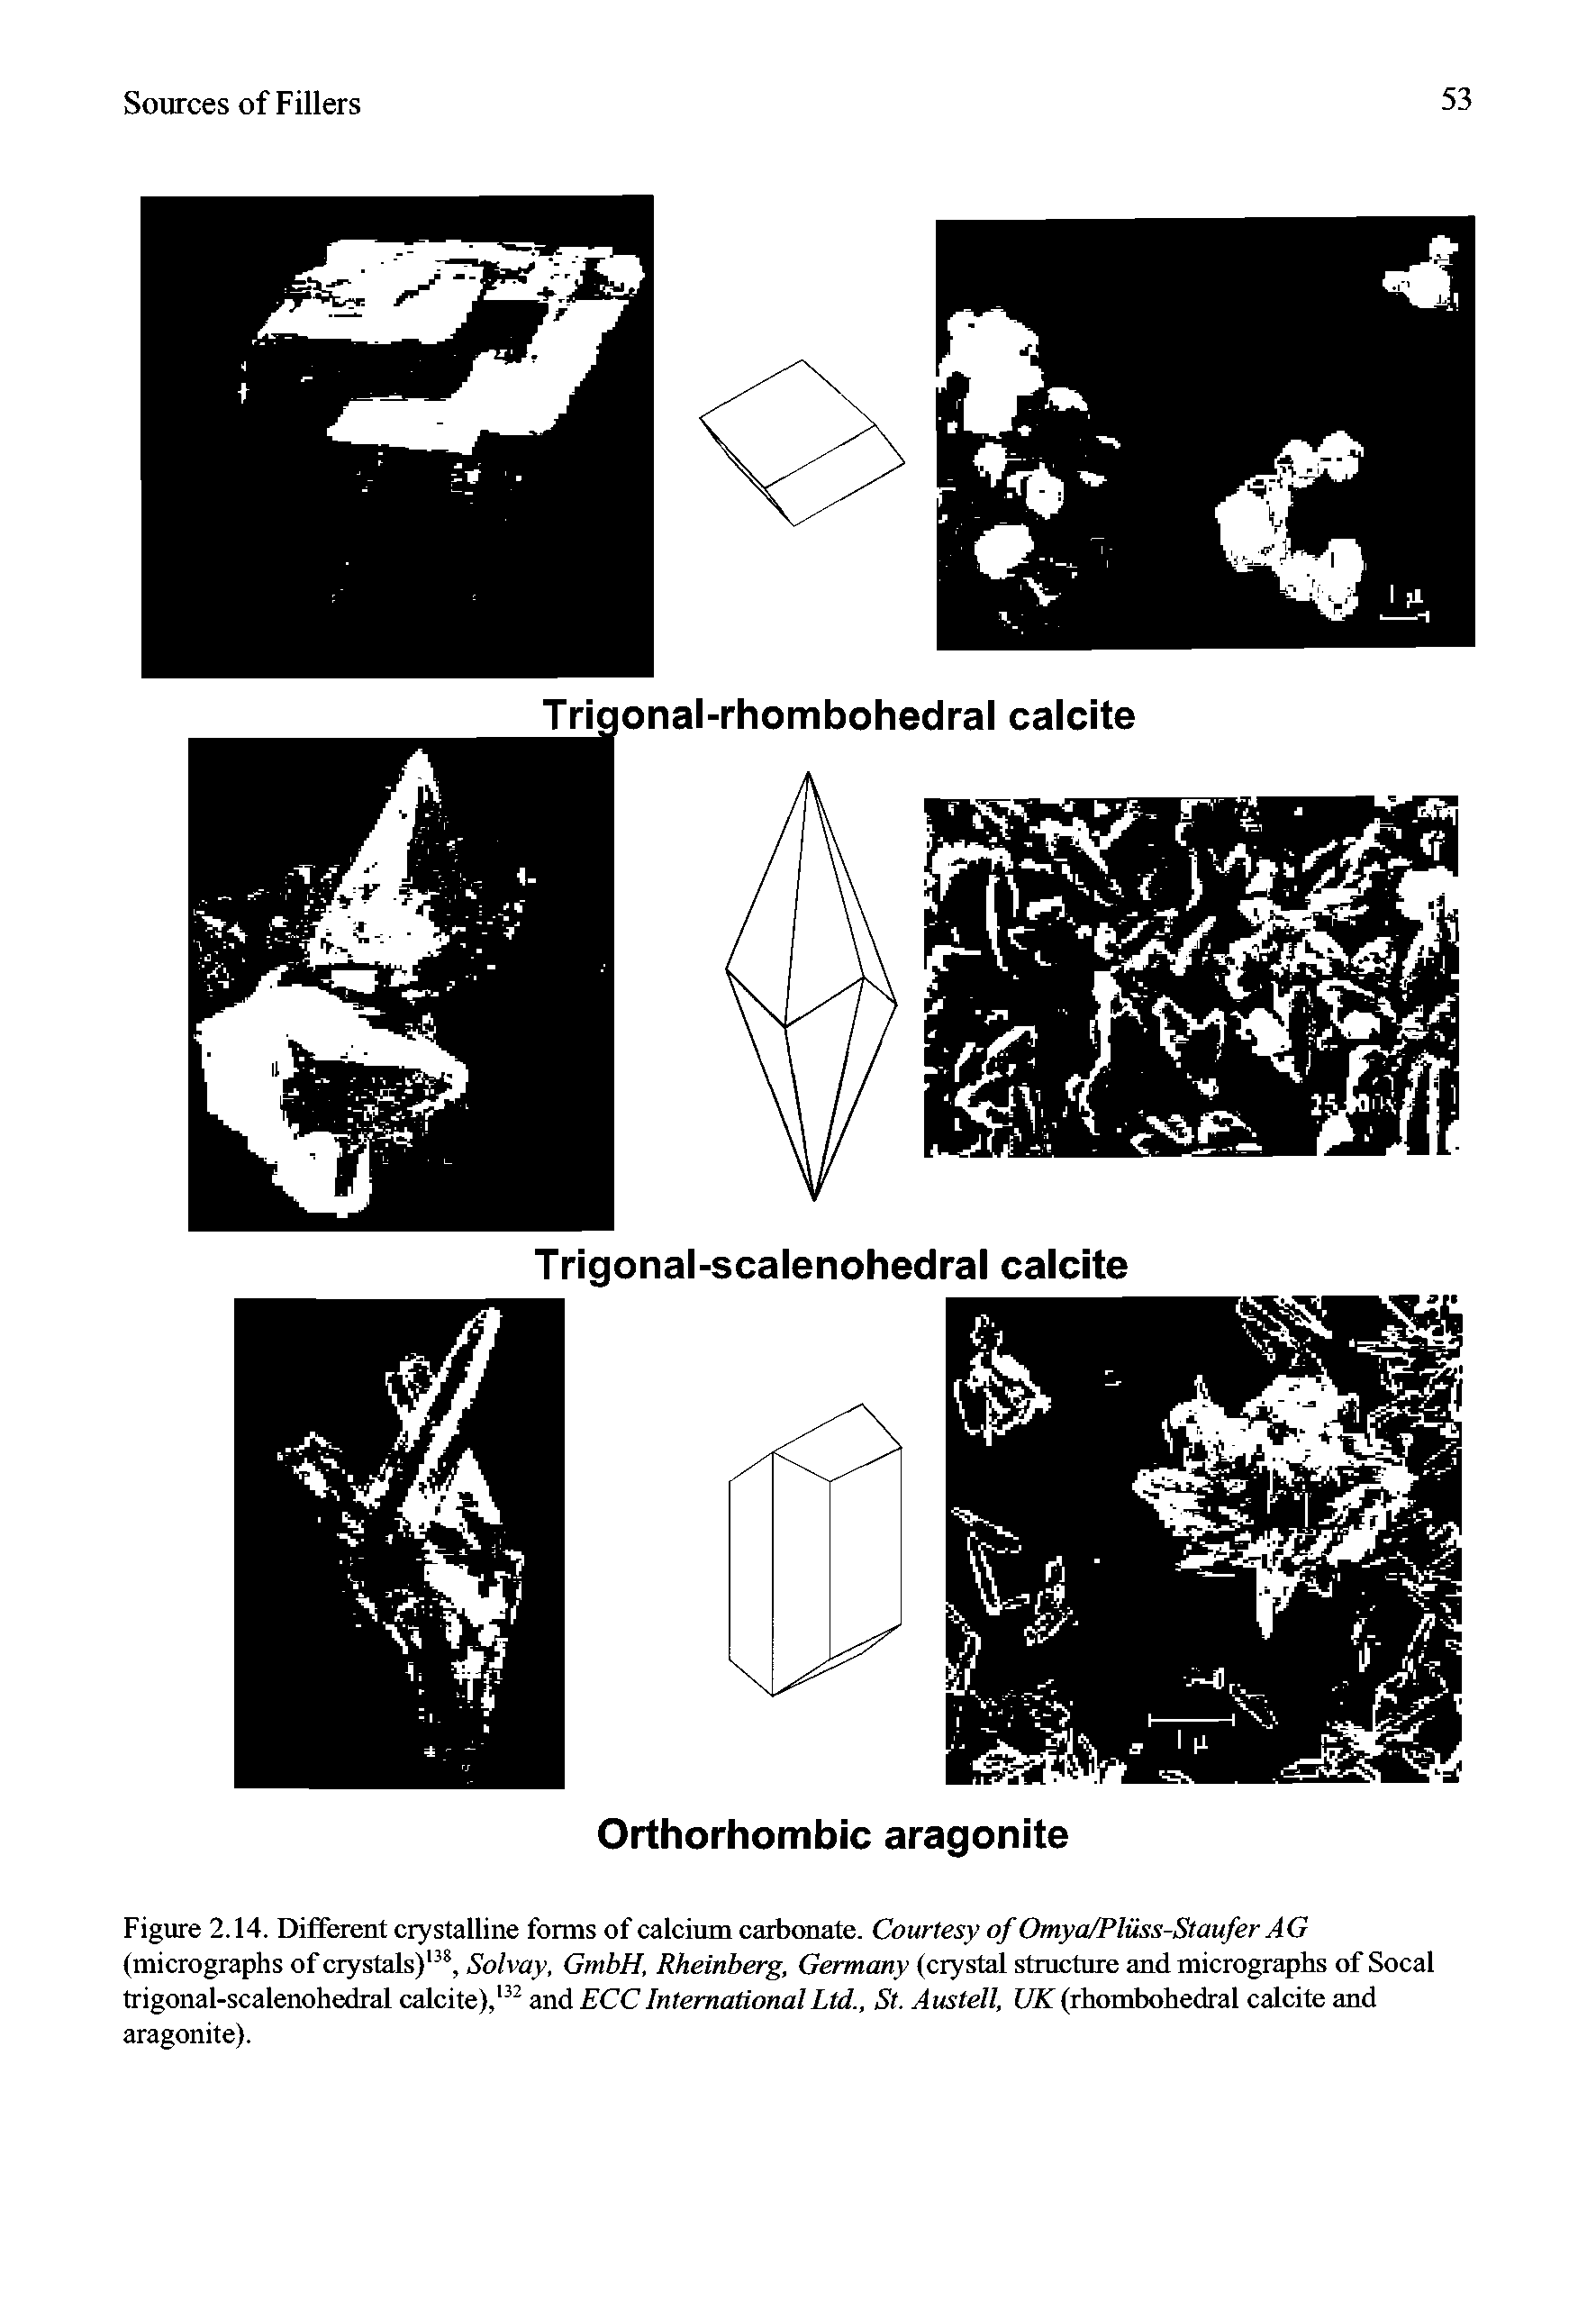 Figure 2.14. Different crystalline forms of calcium carbonate. Courtesy of Omya/Pliiss-Staufer AG (micrographs of crystals), Solvay, GmbH, Rheinberg, Germany (crystal stmcture and micrographs of Socal trigonal-scalenohedral calcite), and ECC International Ltd., St. Austell, UK (rhombohedral calcite and aragonite).